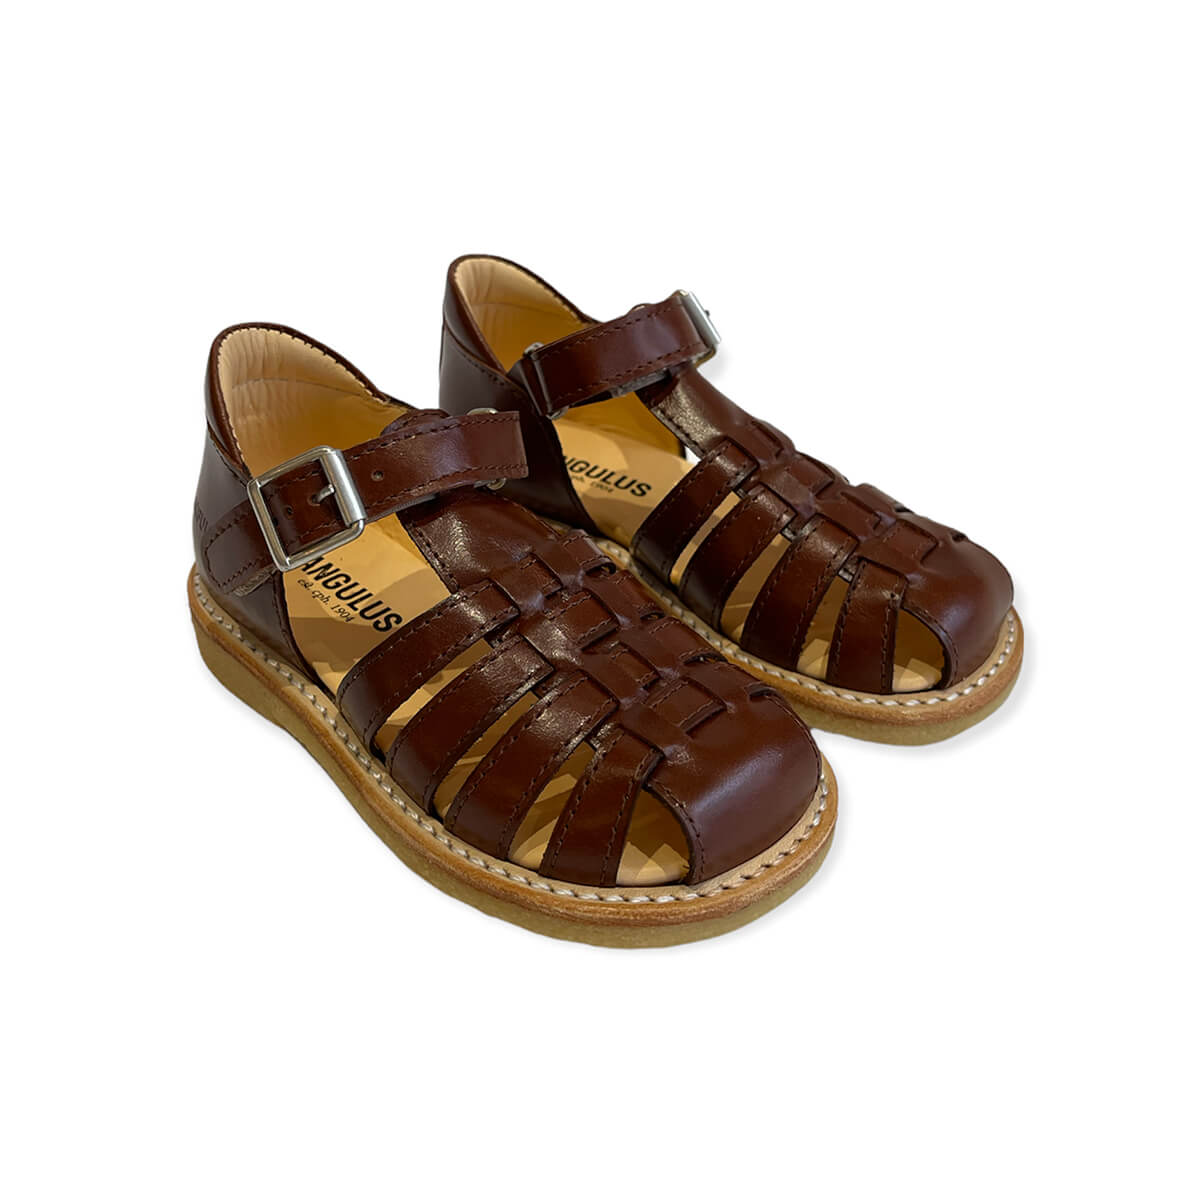 stamme apparat Rig mand Woven Sandals with Buckle in Angulus Brown by Angulus – Junior Edition